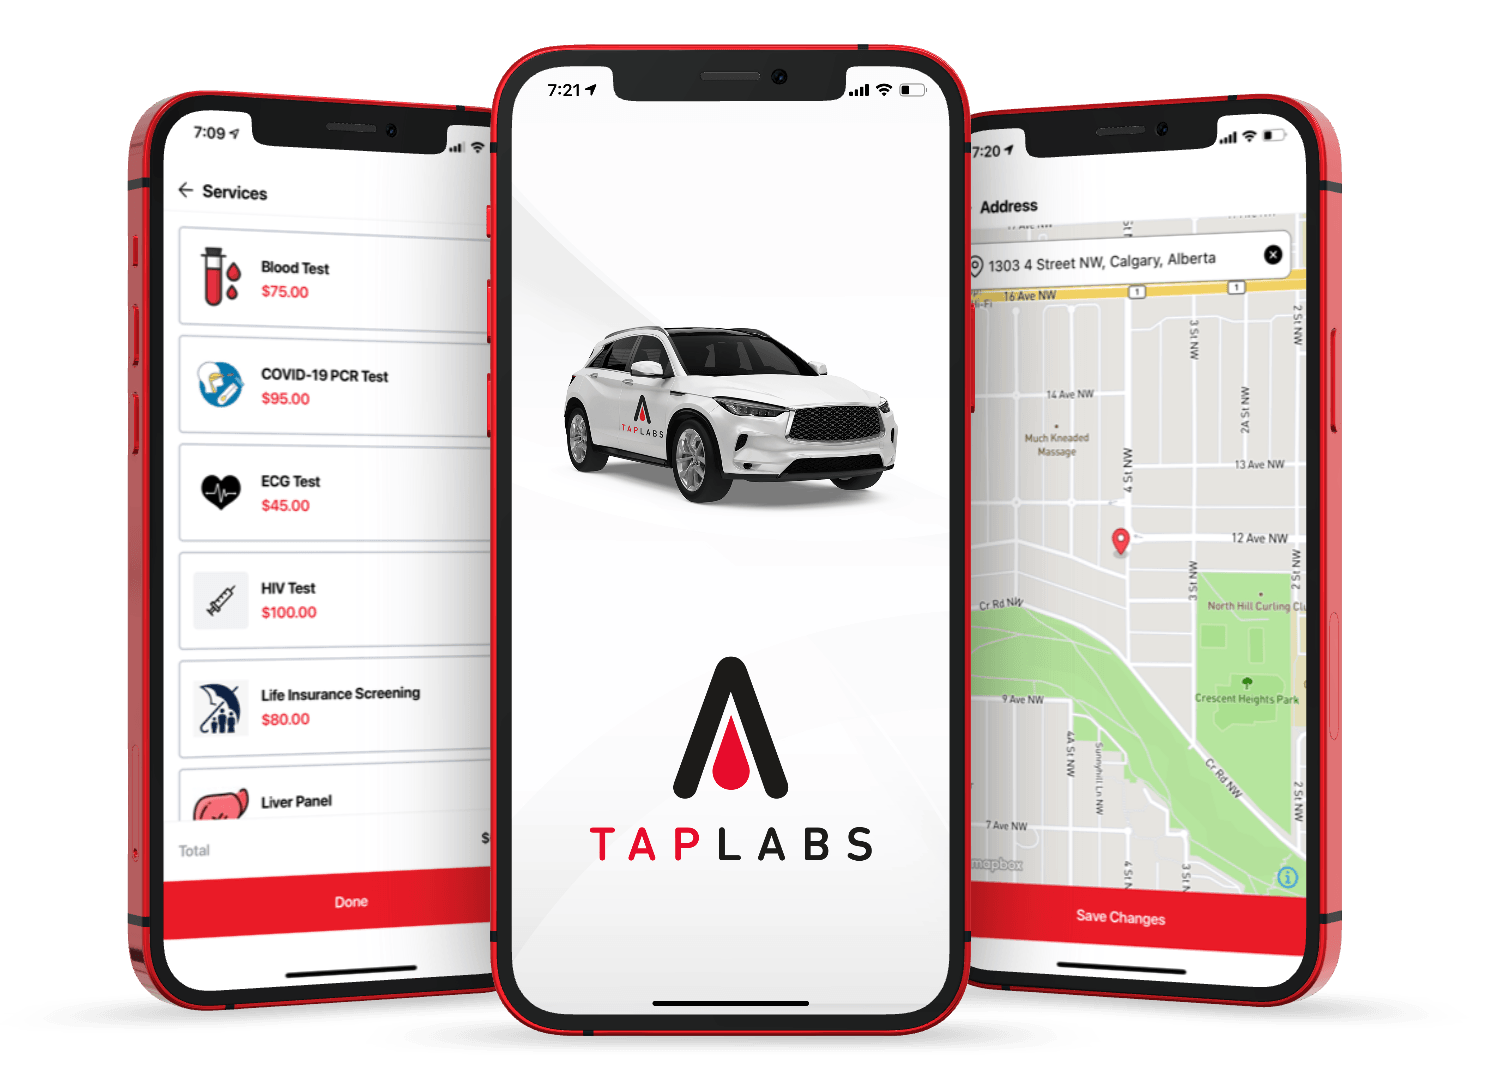 Mobile app for blood collection services by TapLabs